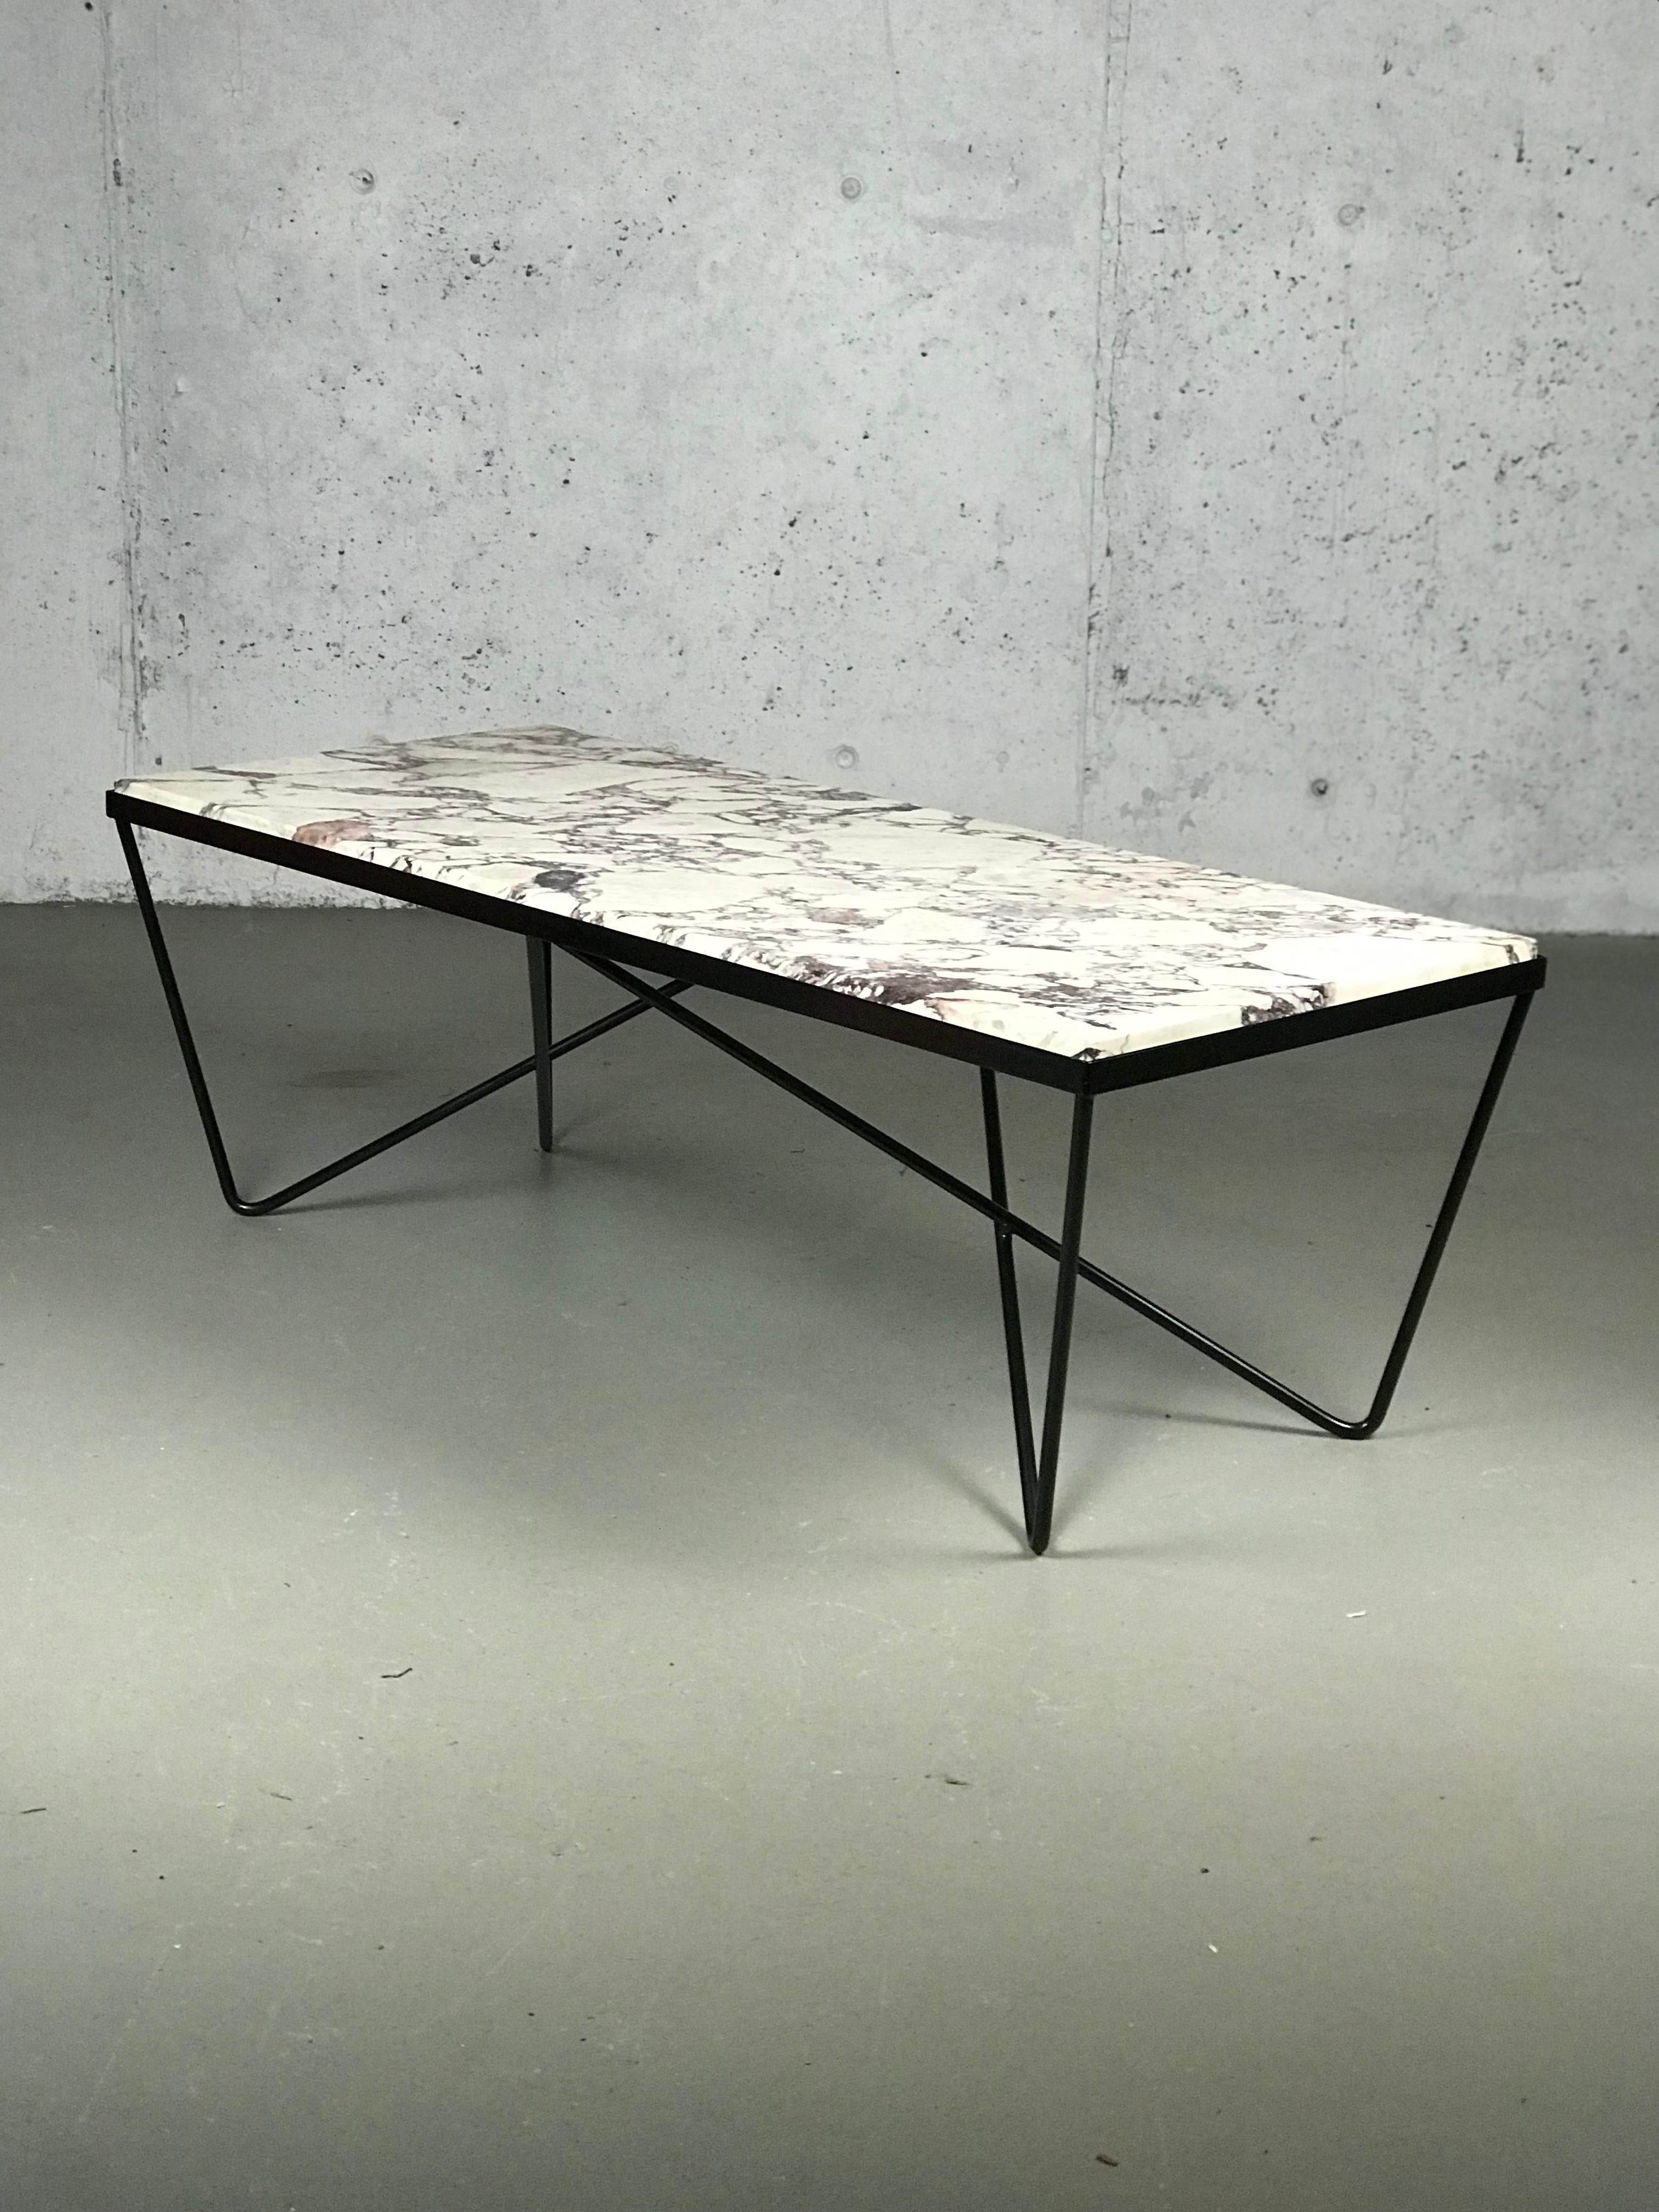 Mid-20th Century Modernist Sculptural Coffee Table after Darrell Landrum